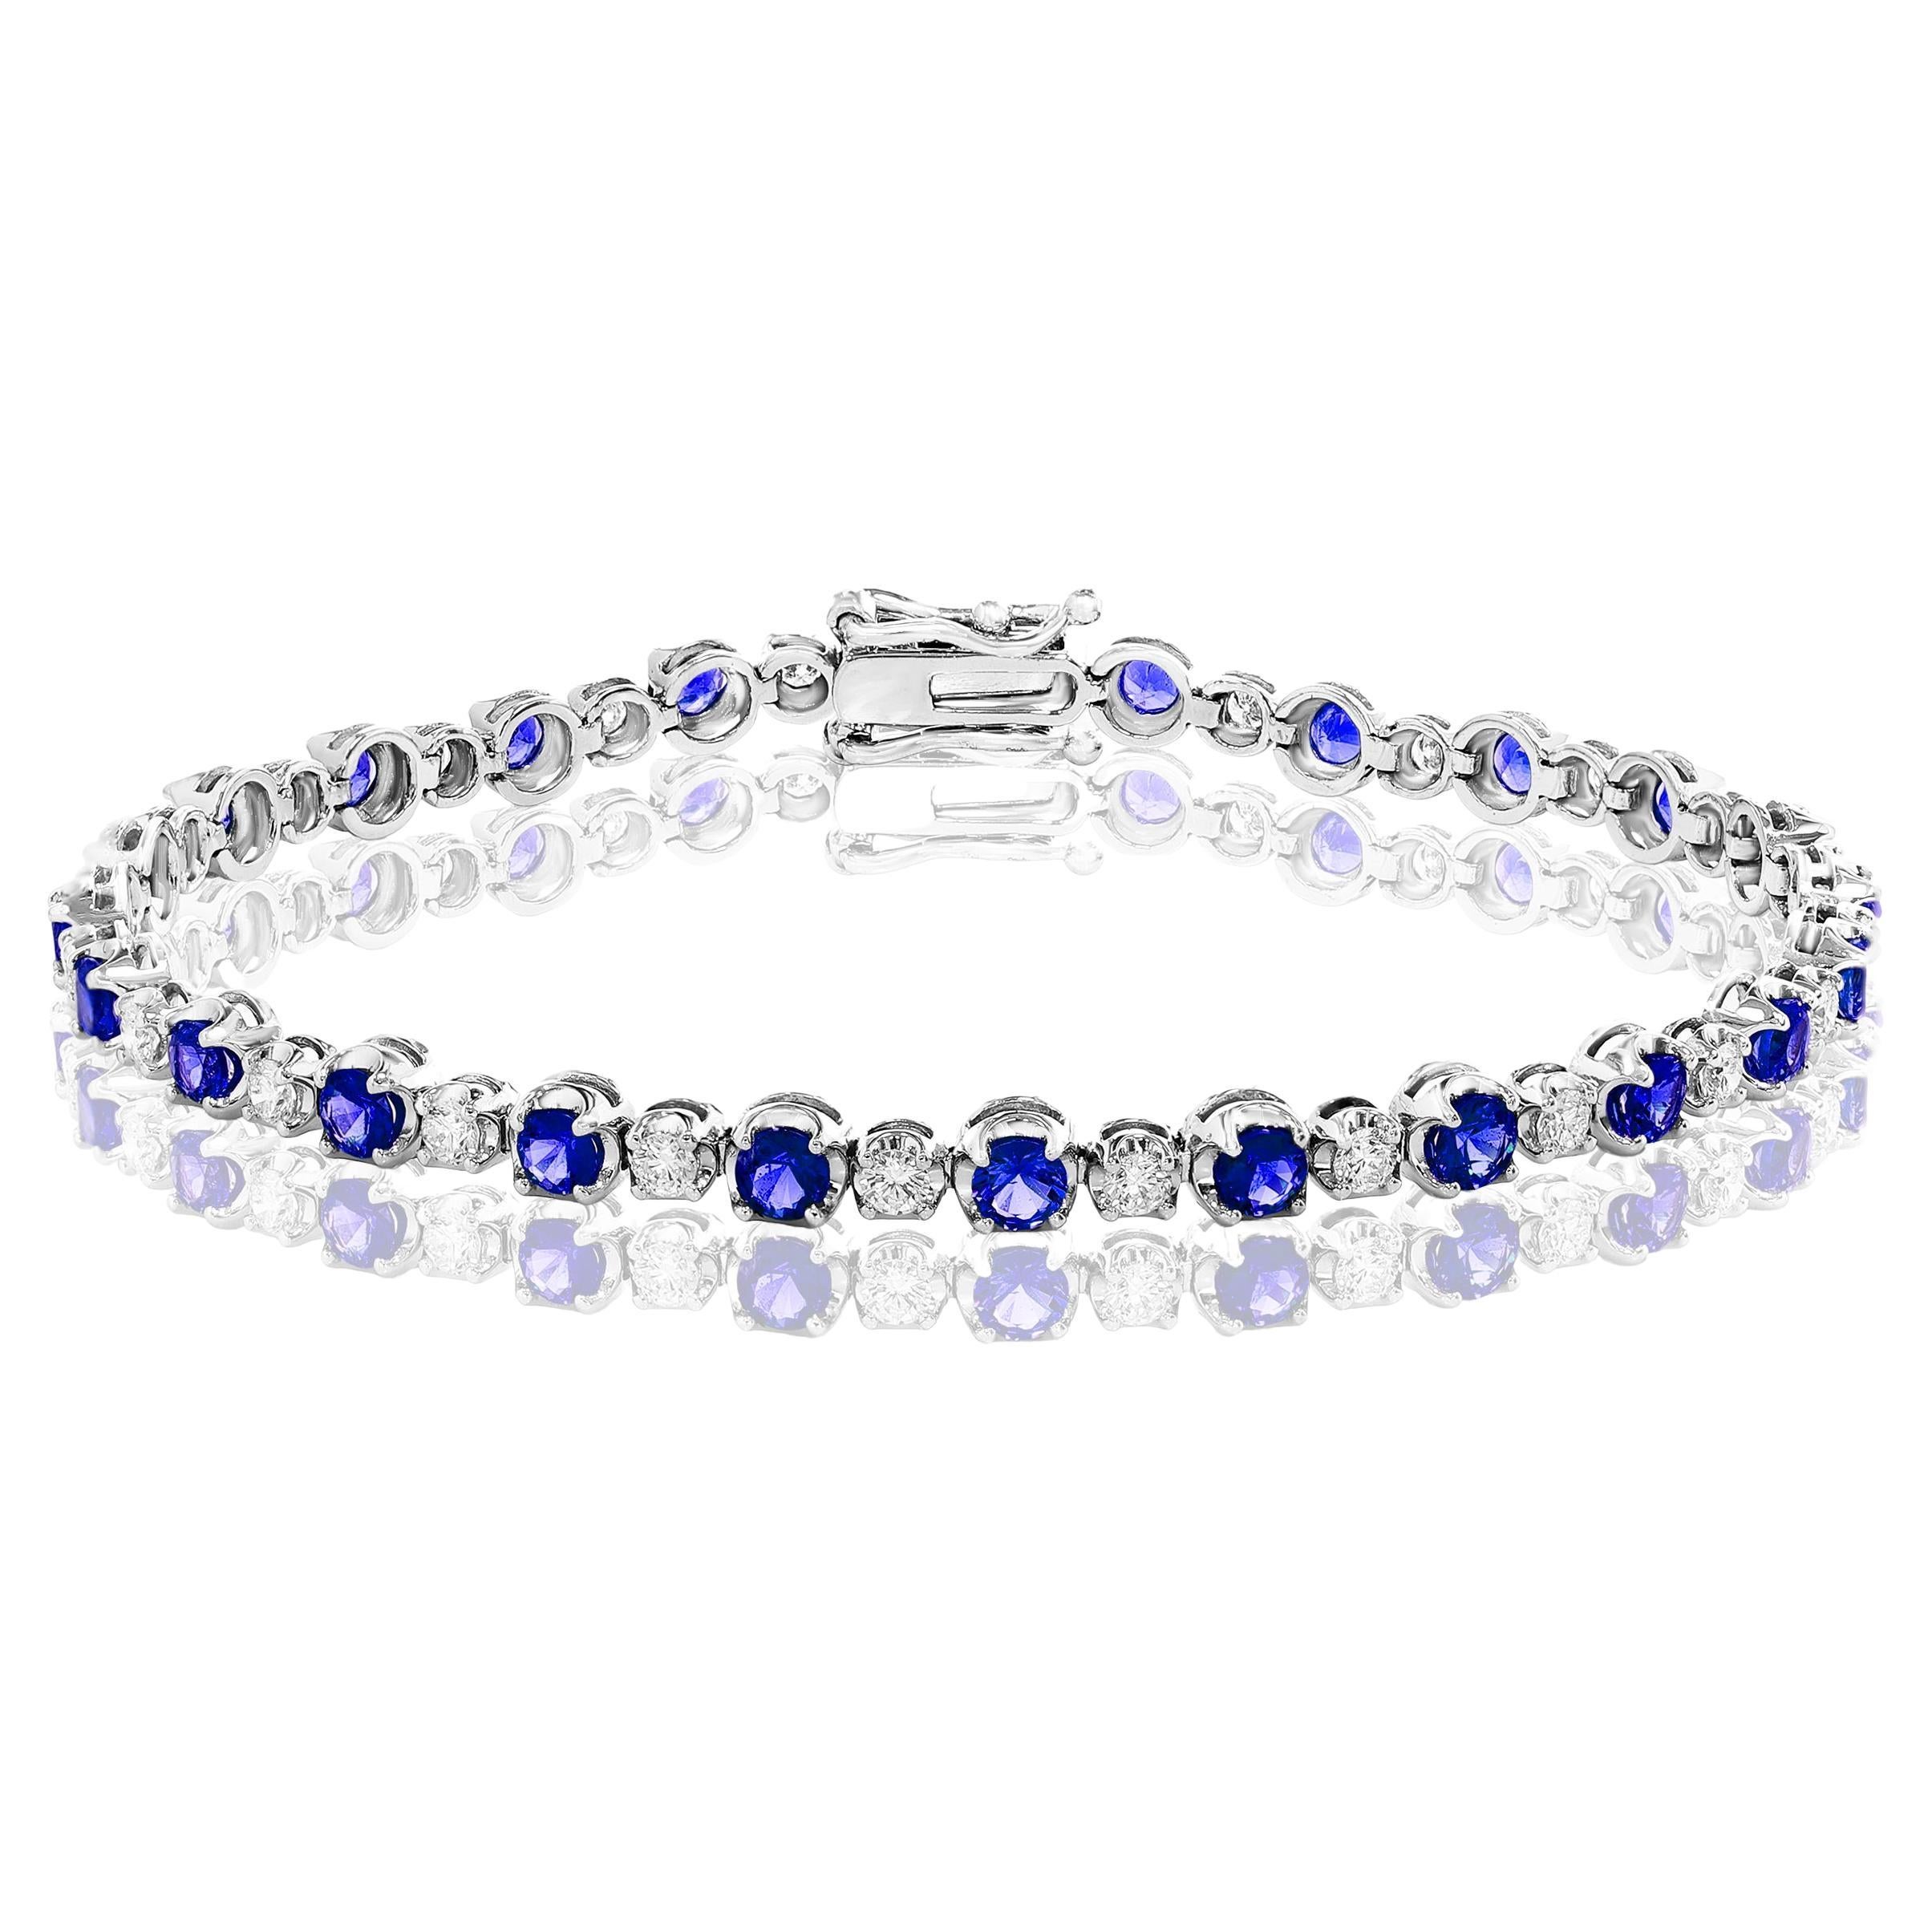 2.96 Carat Round Blue Sapphire and Diamond Bracelet in 14k White Gold For Sale